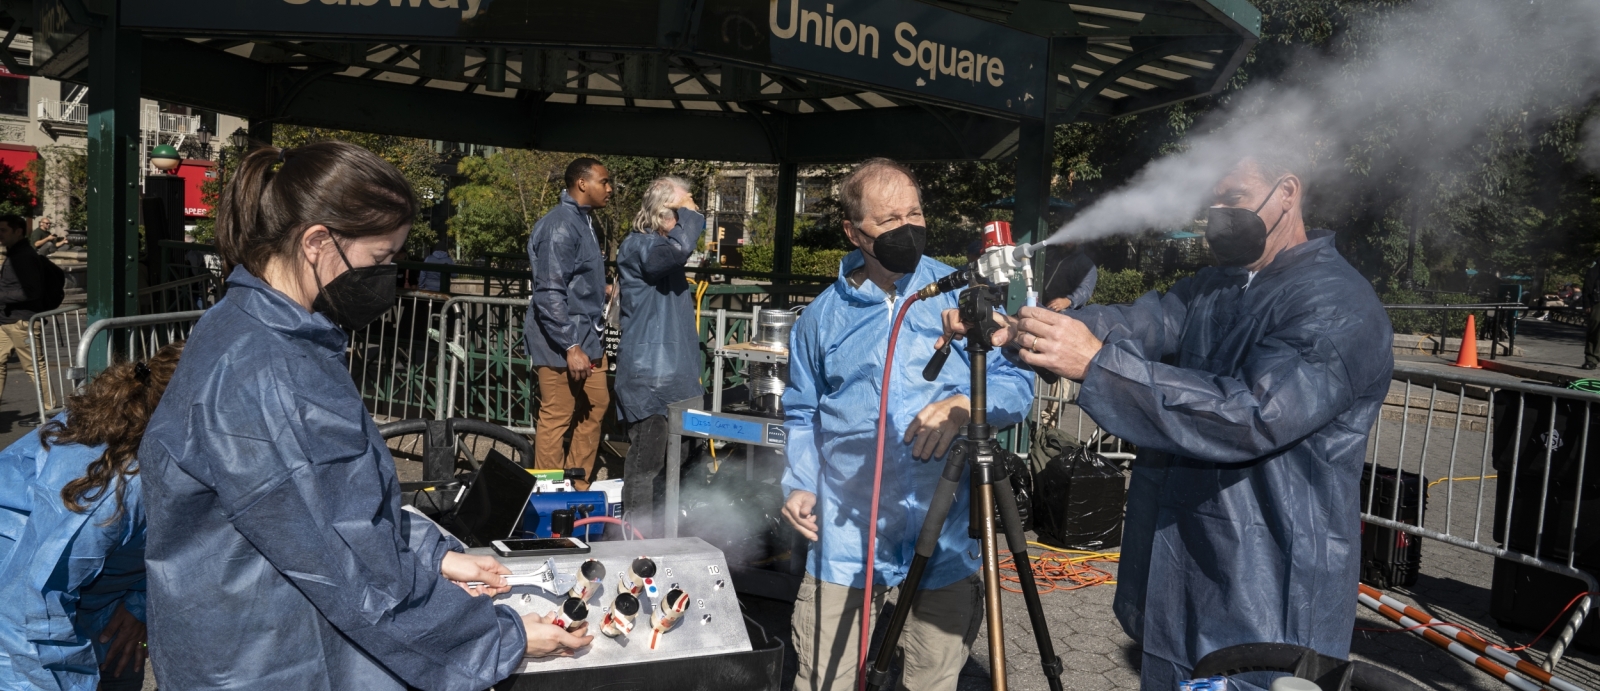 Six scientists in blue lab coats stand in NYC, under a metal gazebo that says "Subway, Union Square" Two of the scientsits operate a small sprayer, on a tripod, that is shooting out a plume of white particles.